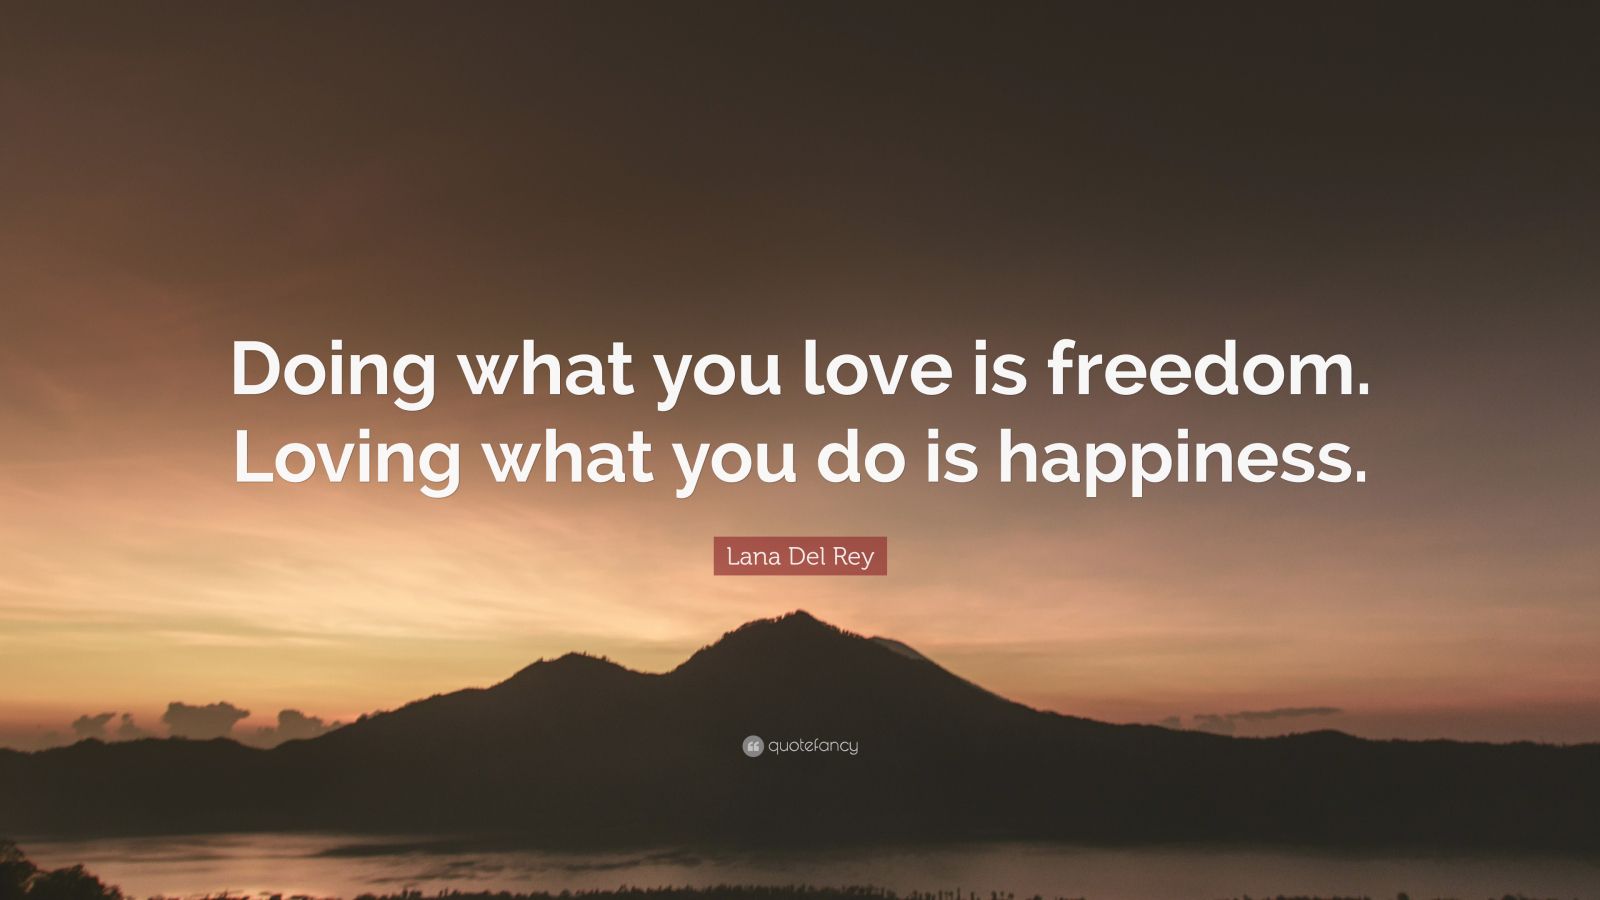 Lana Del Rey Quote: “Doing what you love is freedom. Loving what you do